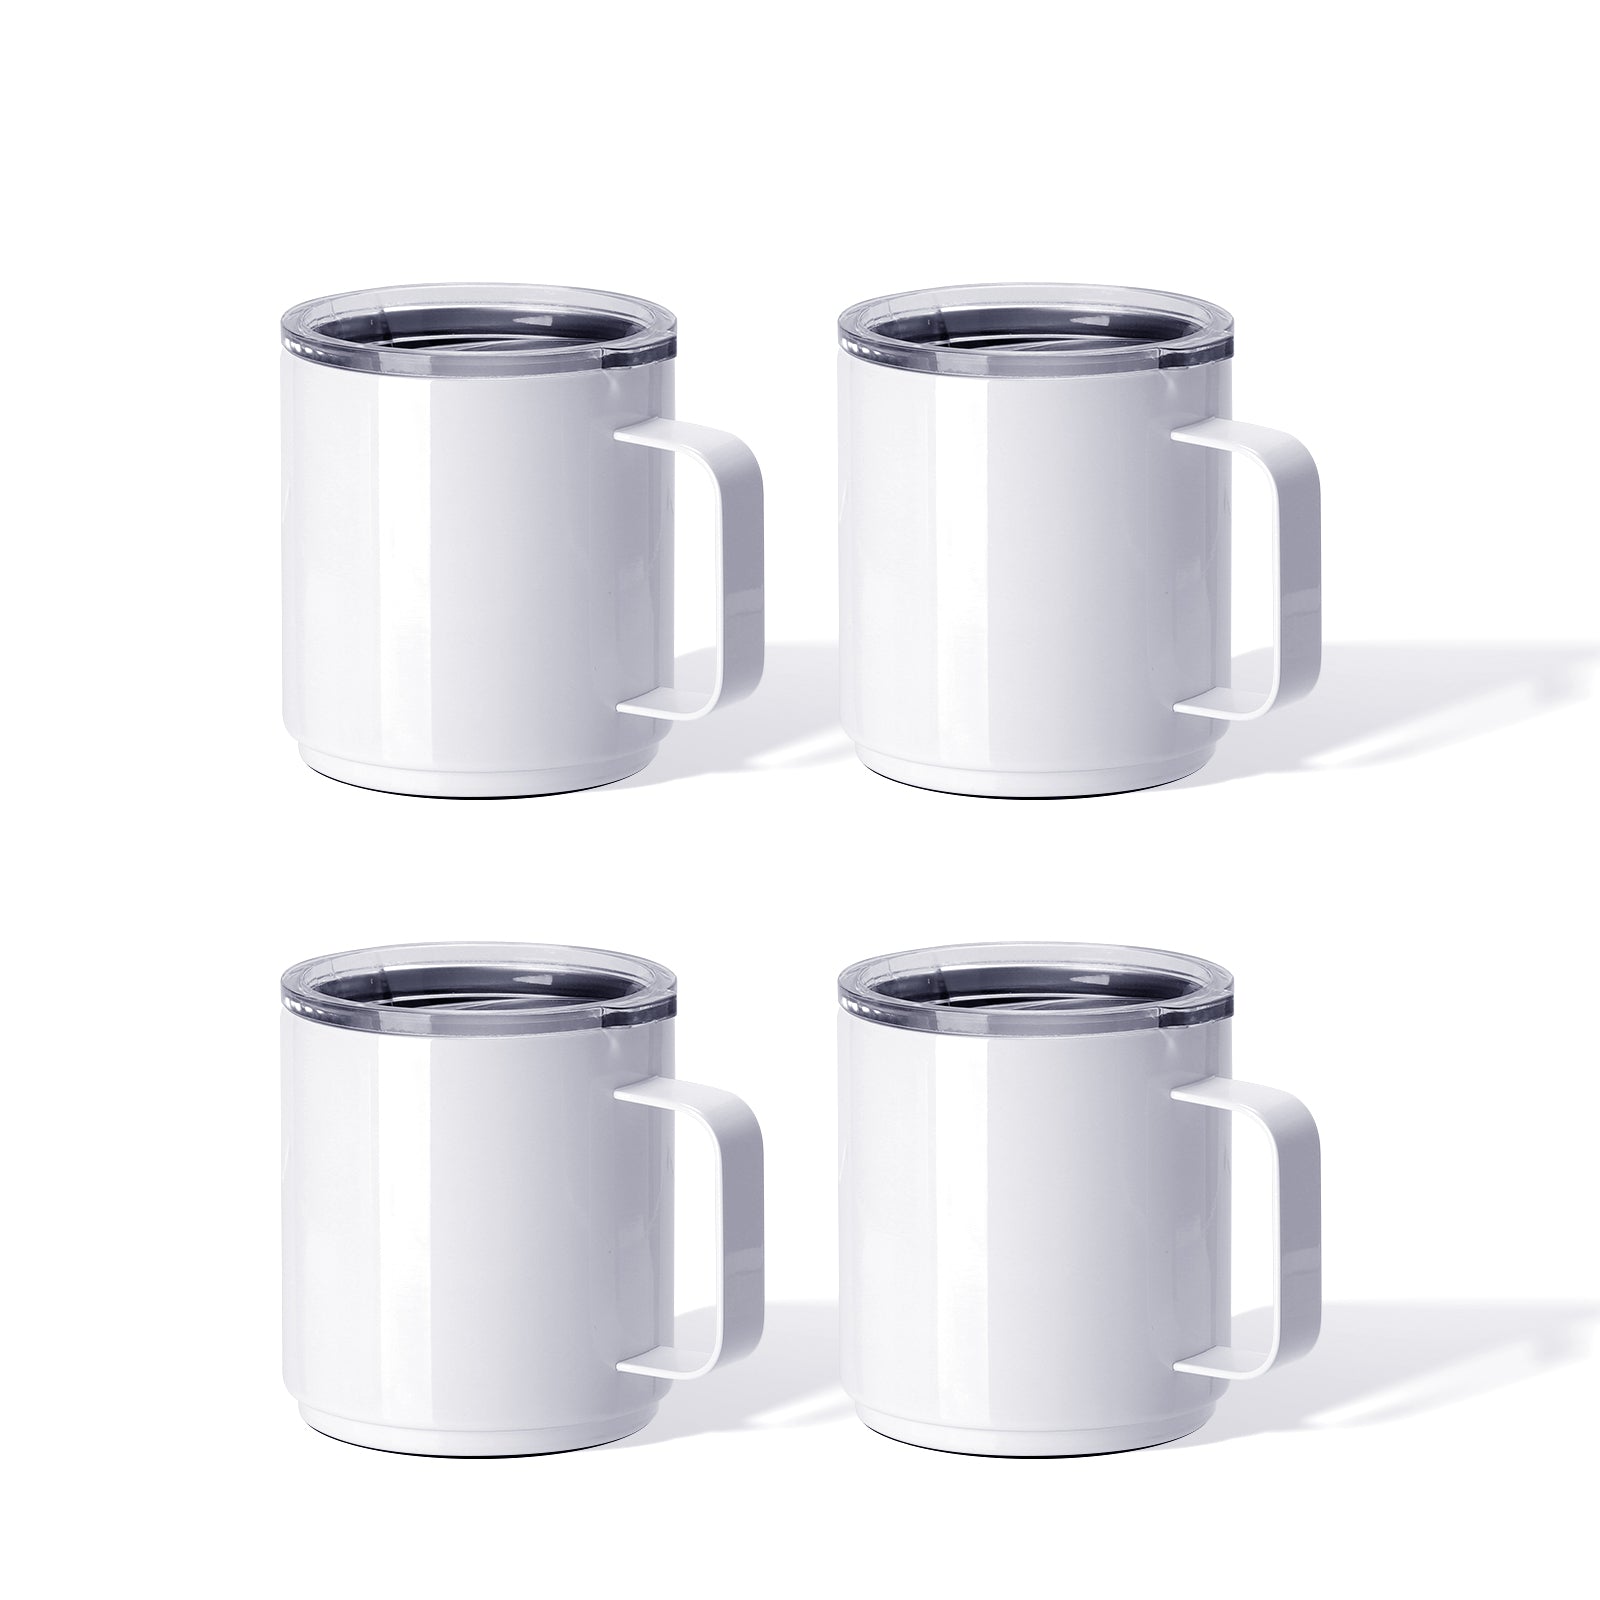 Sublimation Stackable Coffee Mugs with Direct Drink Lid and Handle